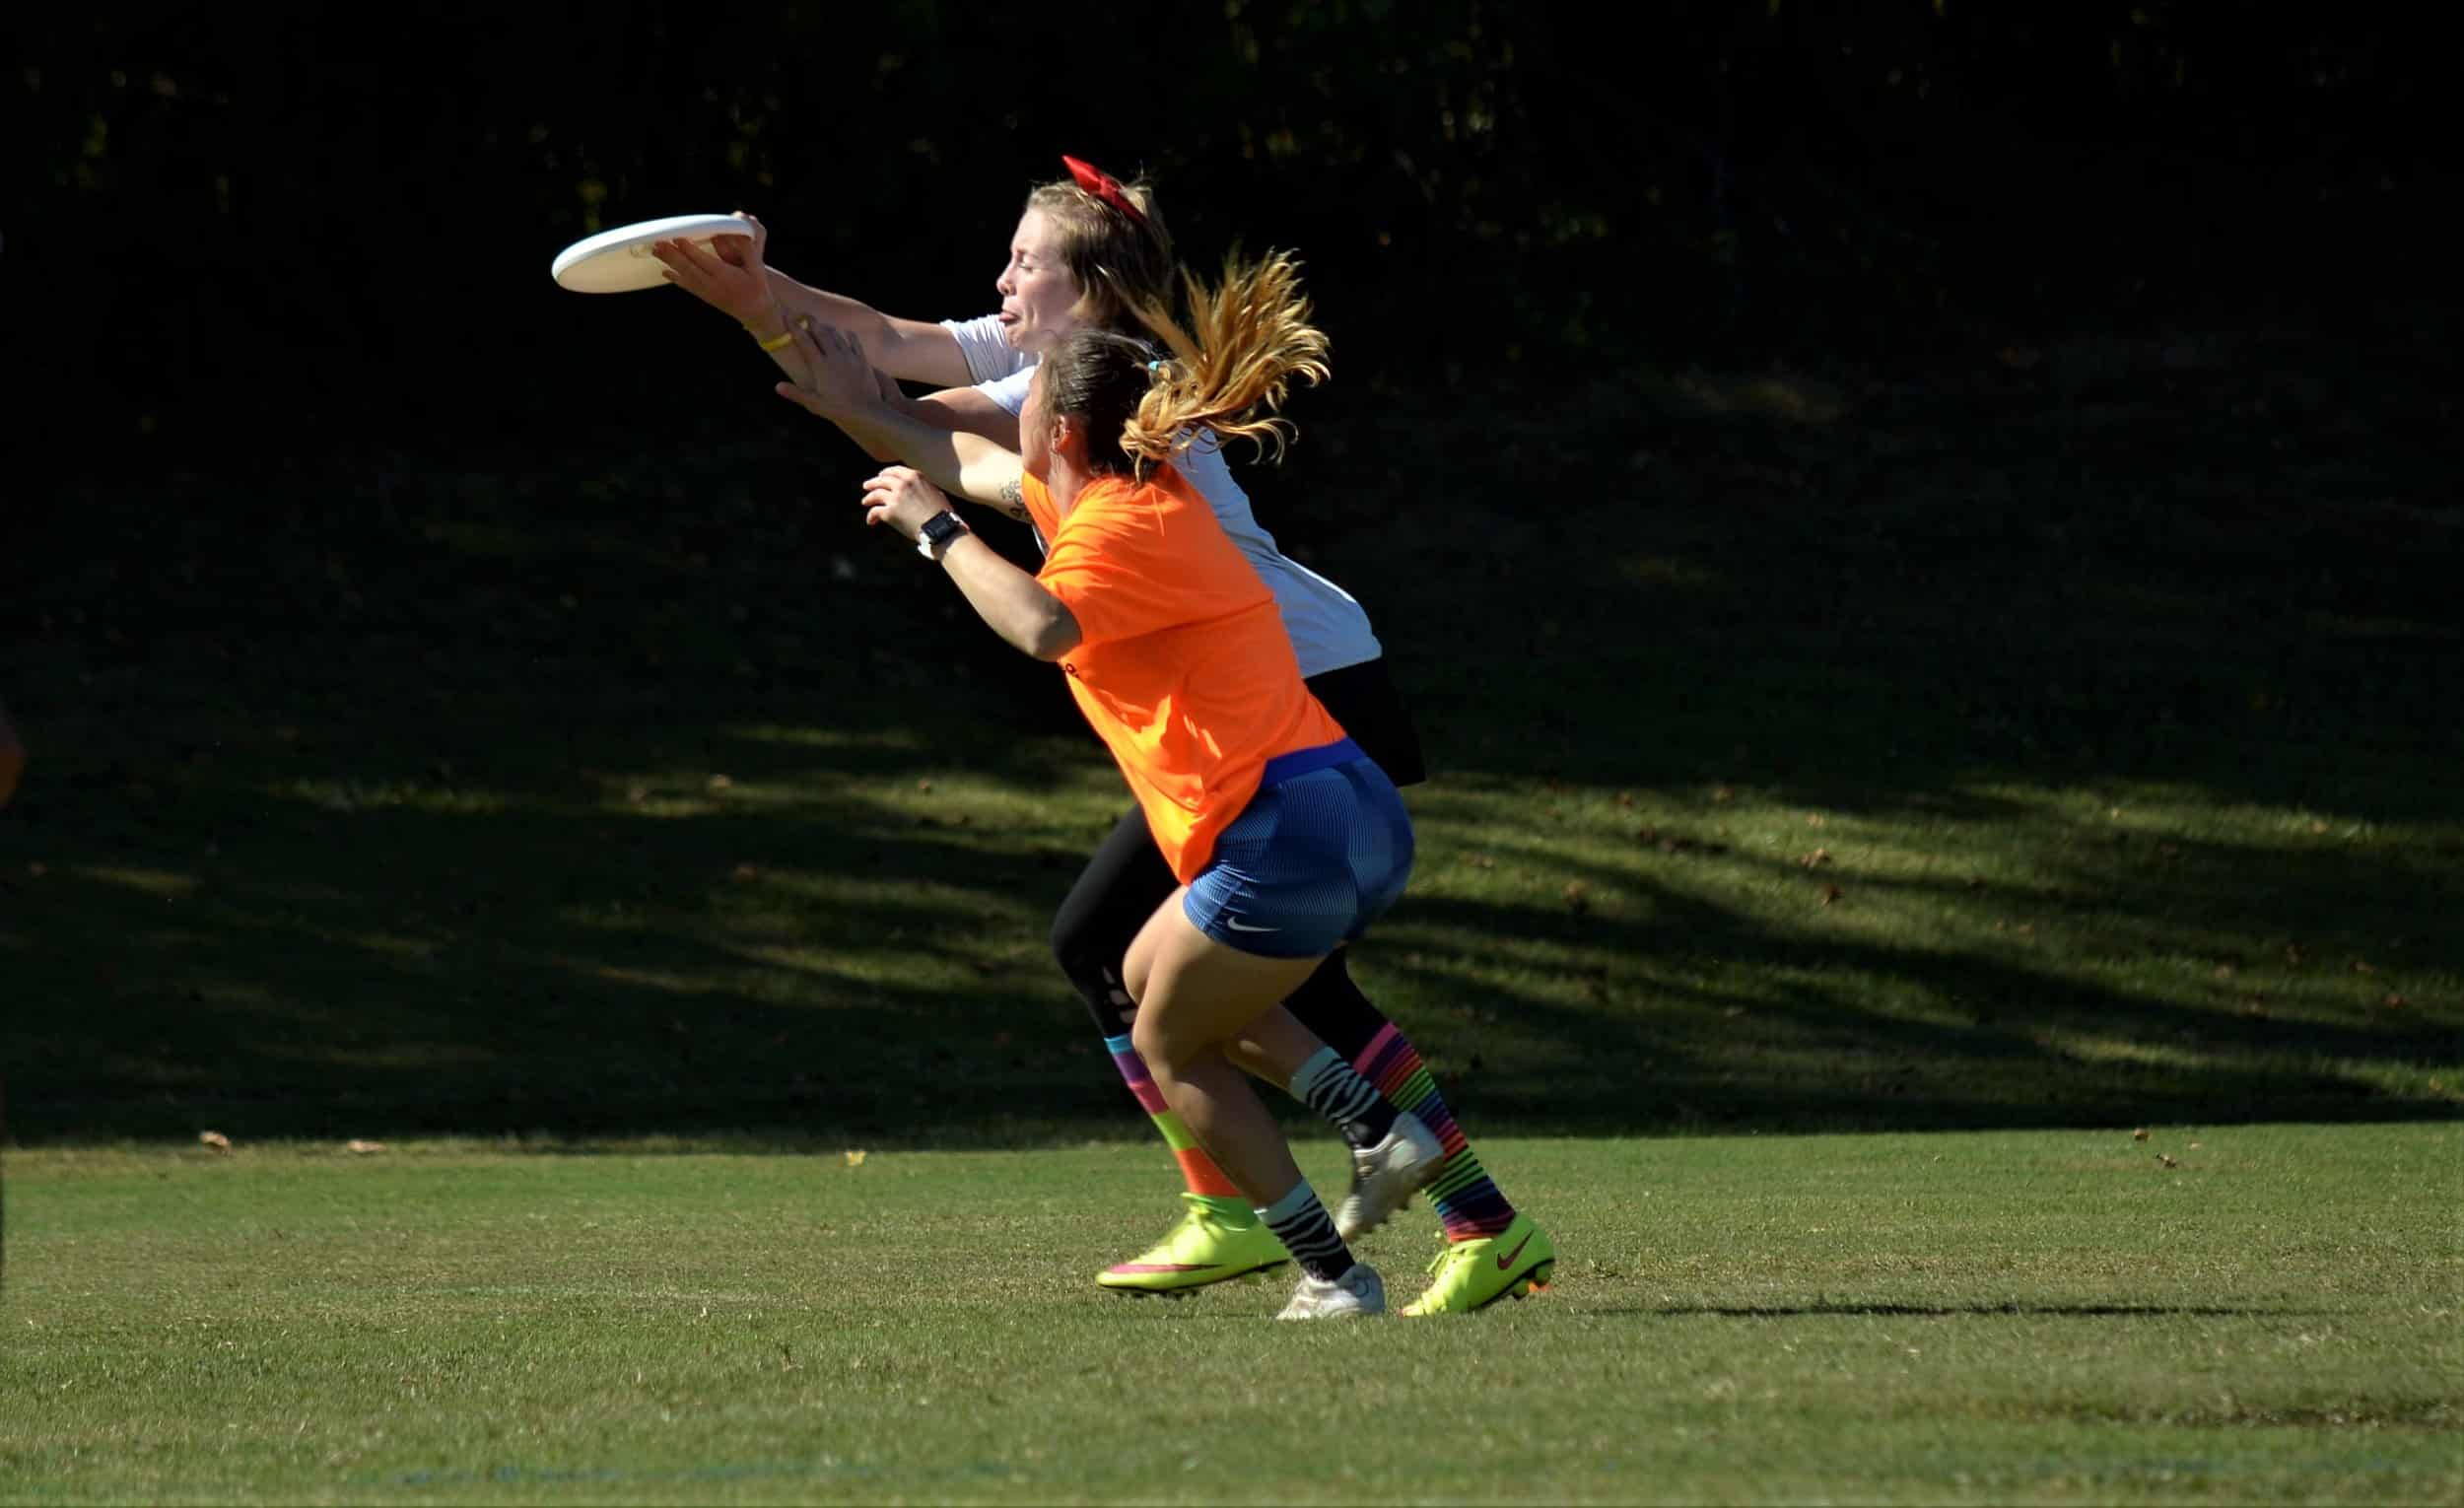 Sarah Catherine Pepper catches a pass with a hard defense from Campbell University.